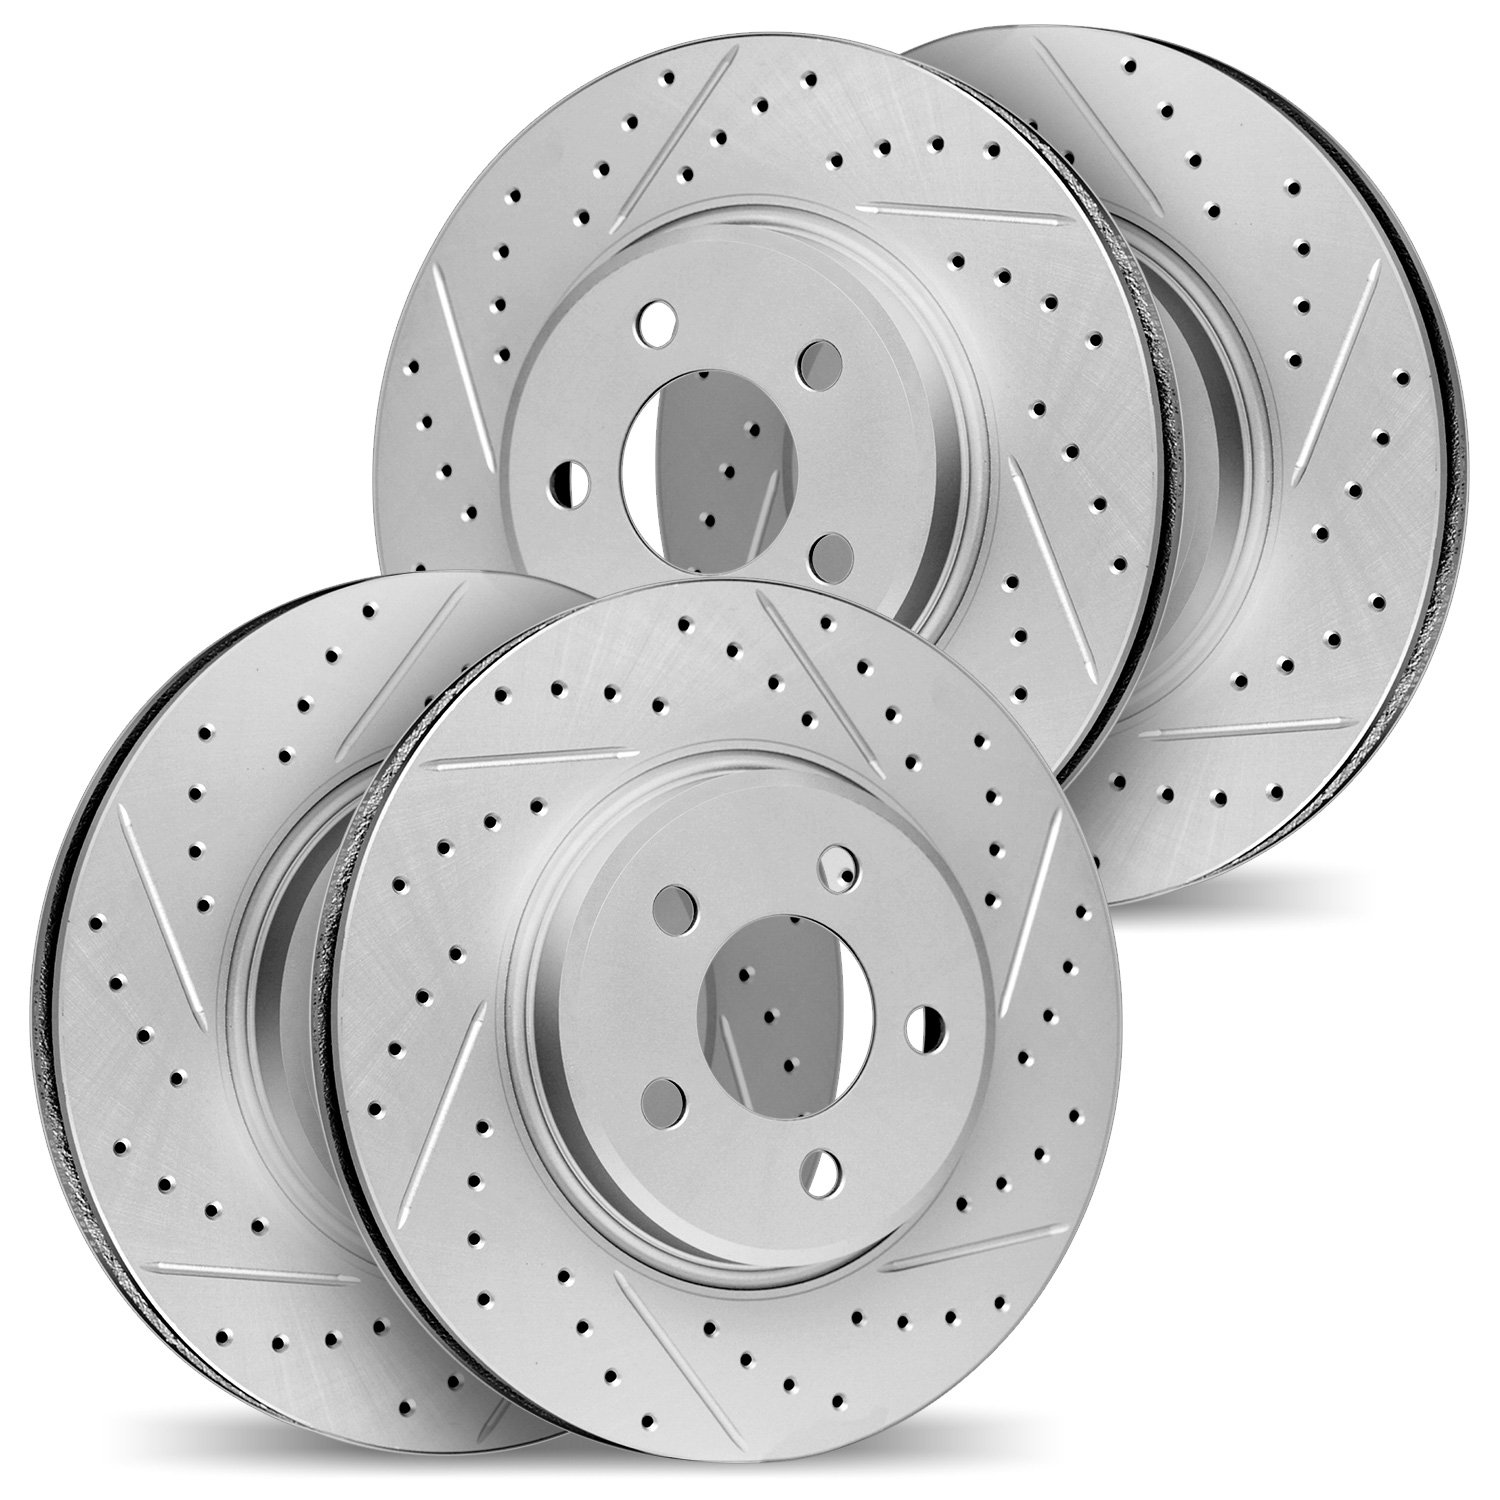 2004-46028 Geoperformance Drilled/Slotted Brake Rotors, Fits Select GM, Position: Front and Rear